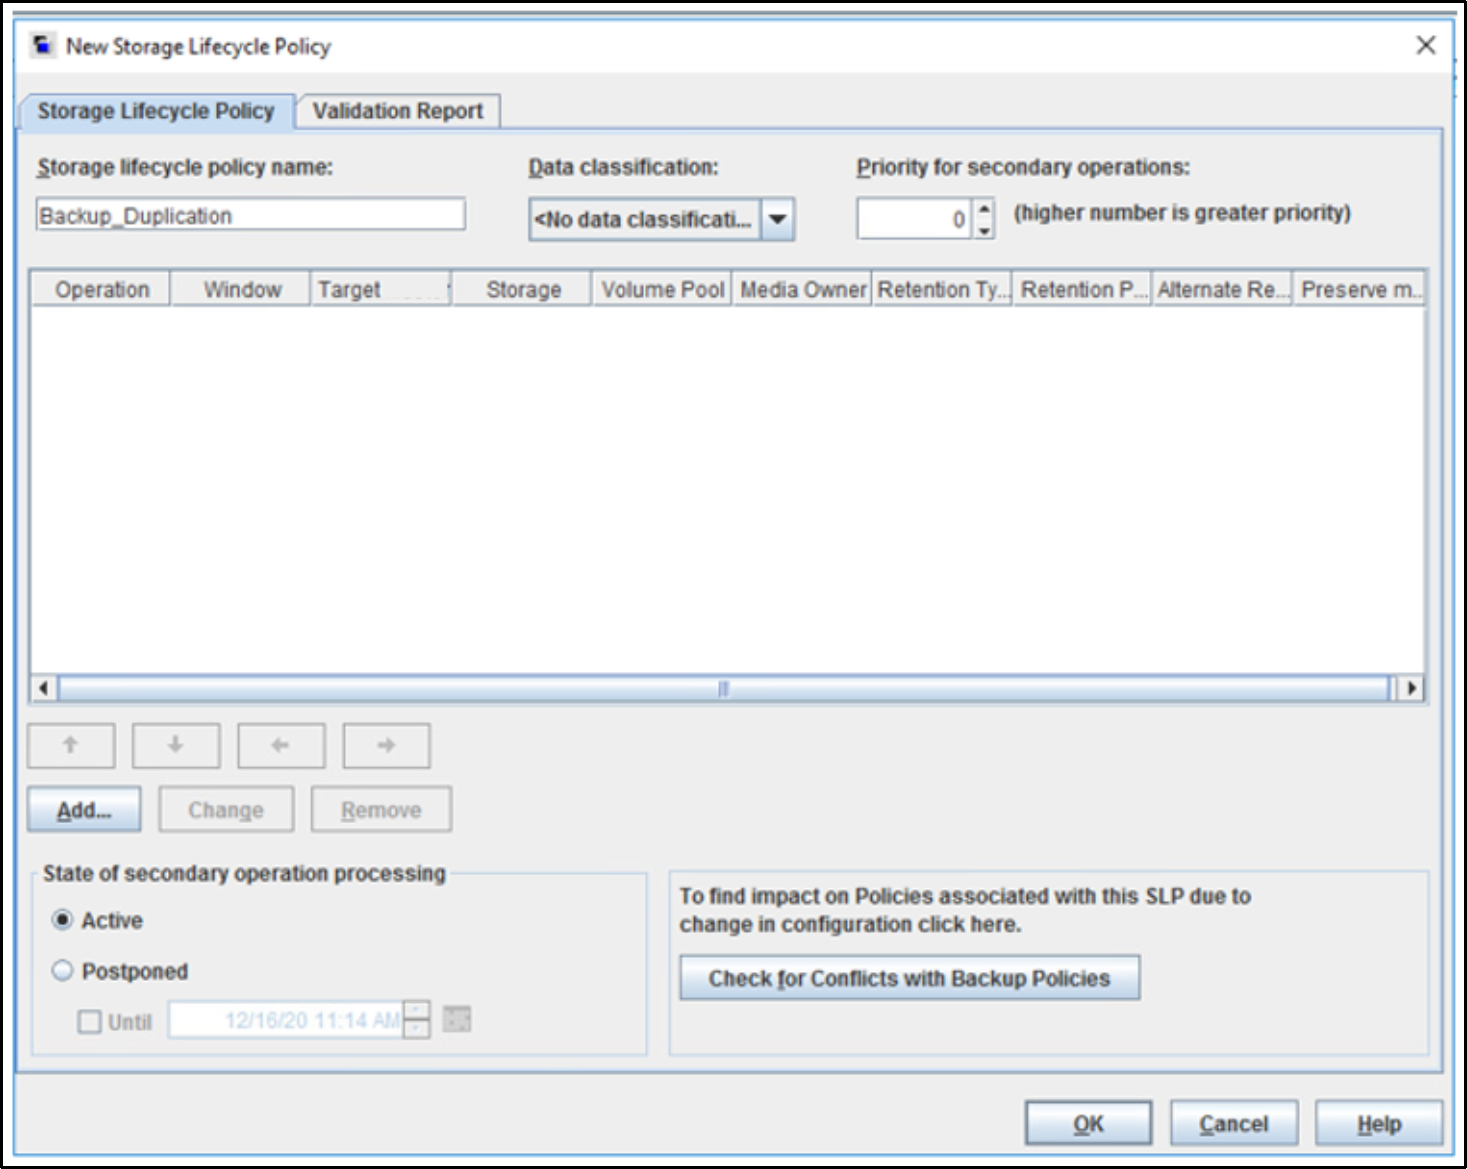 The image shows the option to input Storage Lifecycle Policy name and select Add to configure the backup operation.